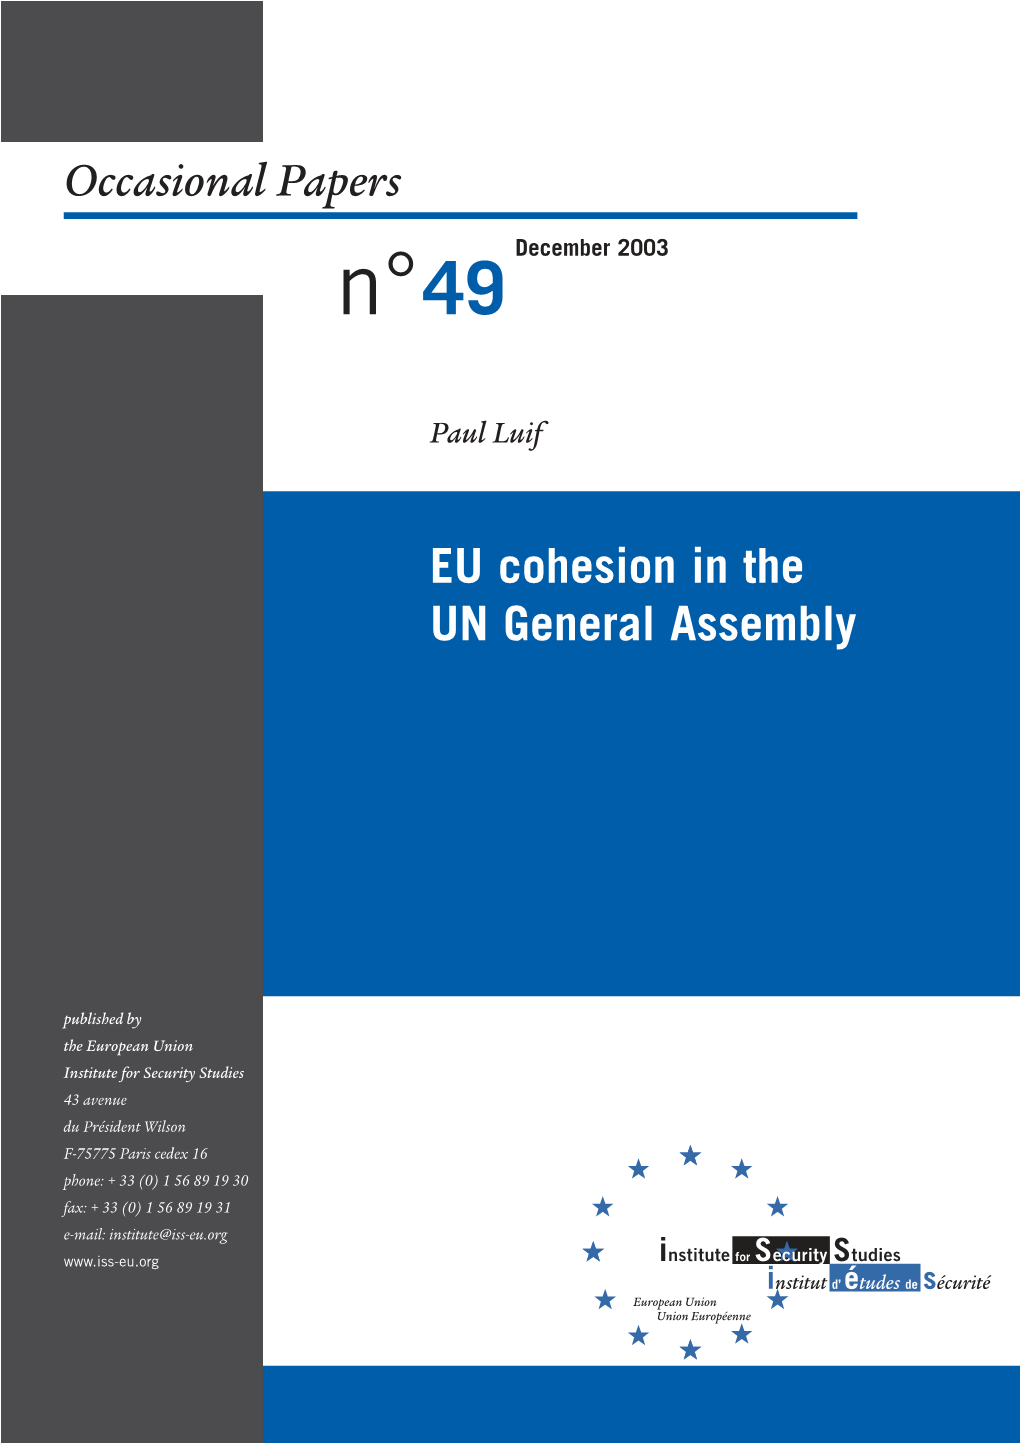 Occasional Papers EU Cohesion in the UN General Assembly